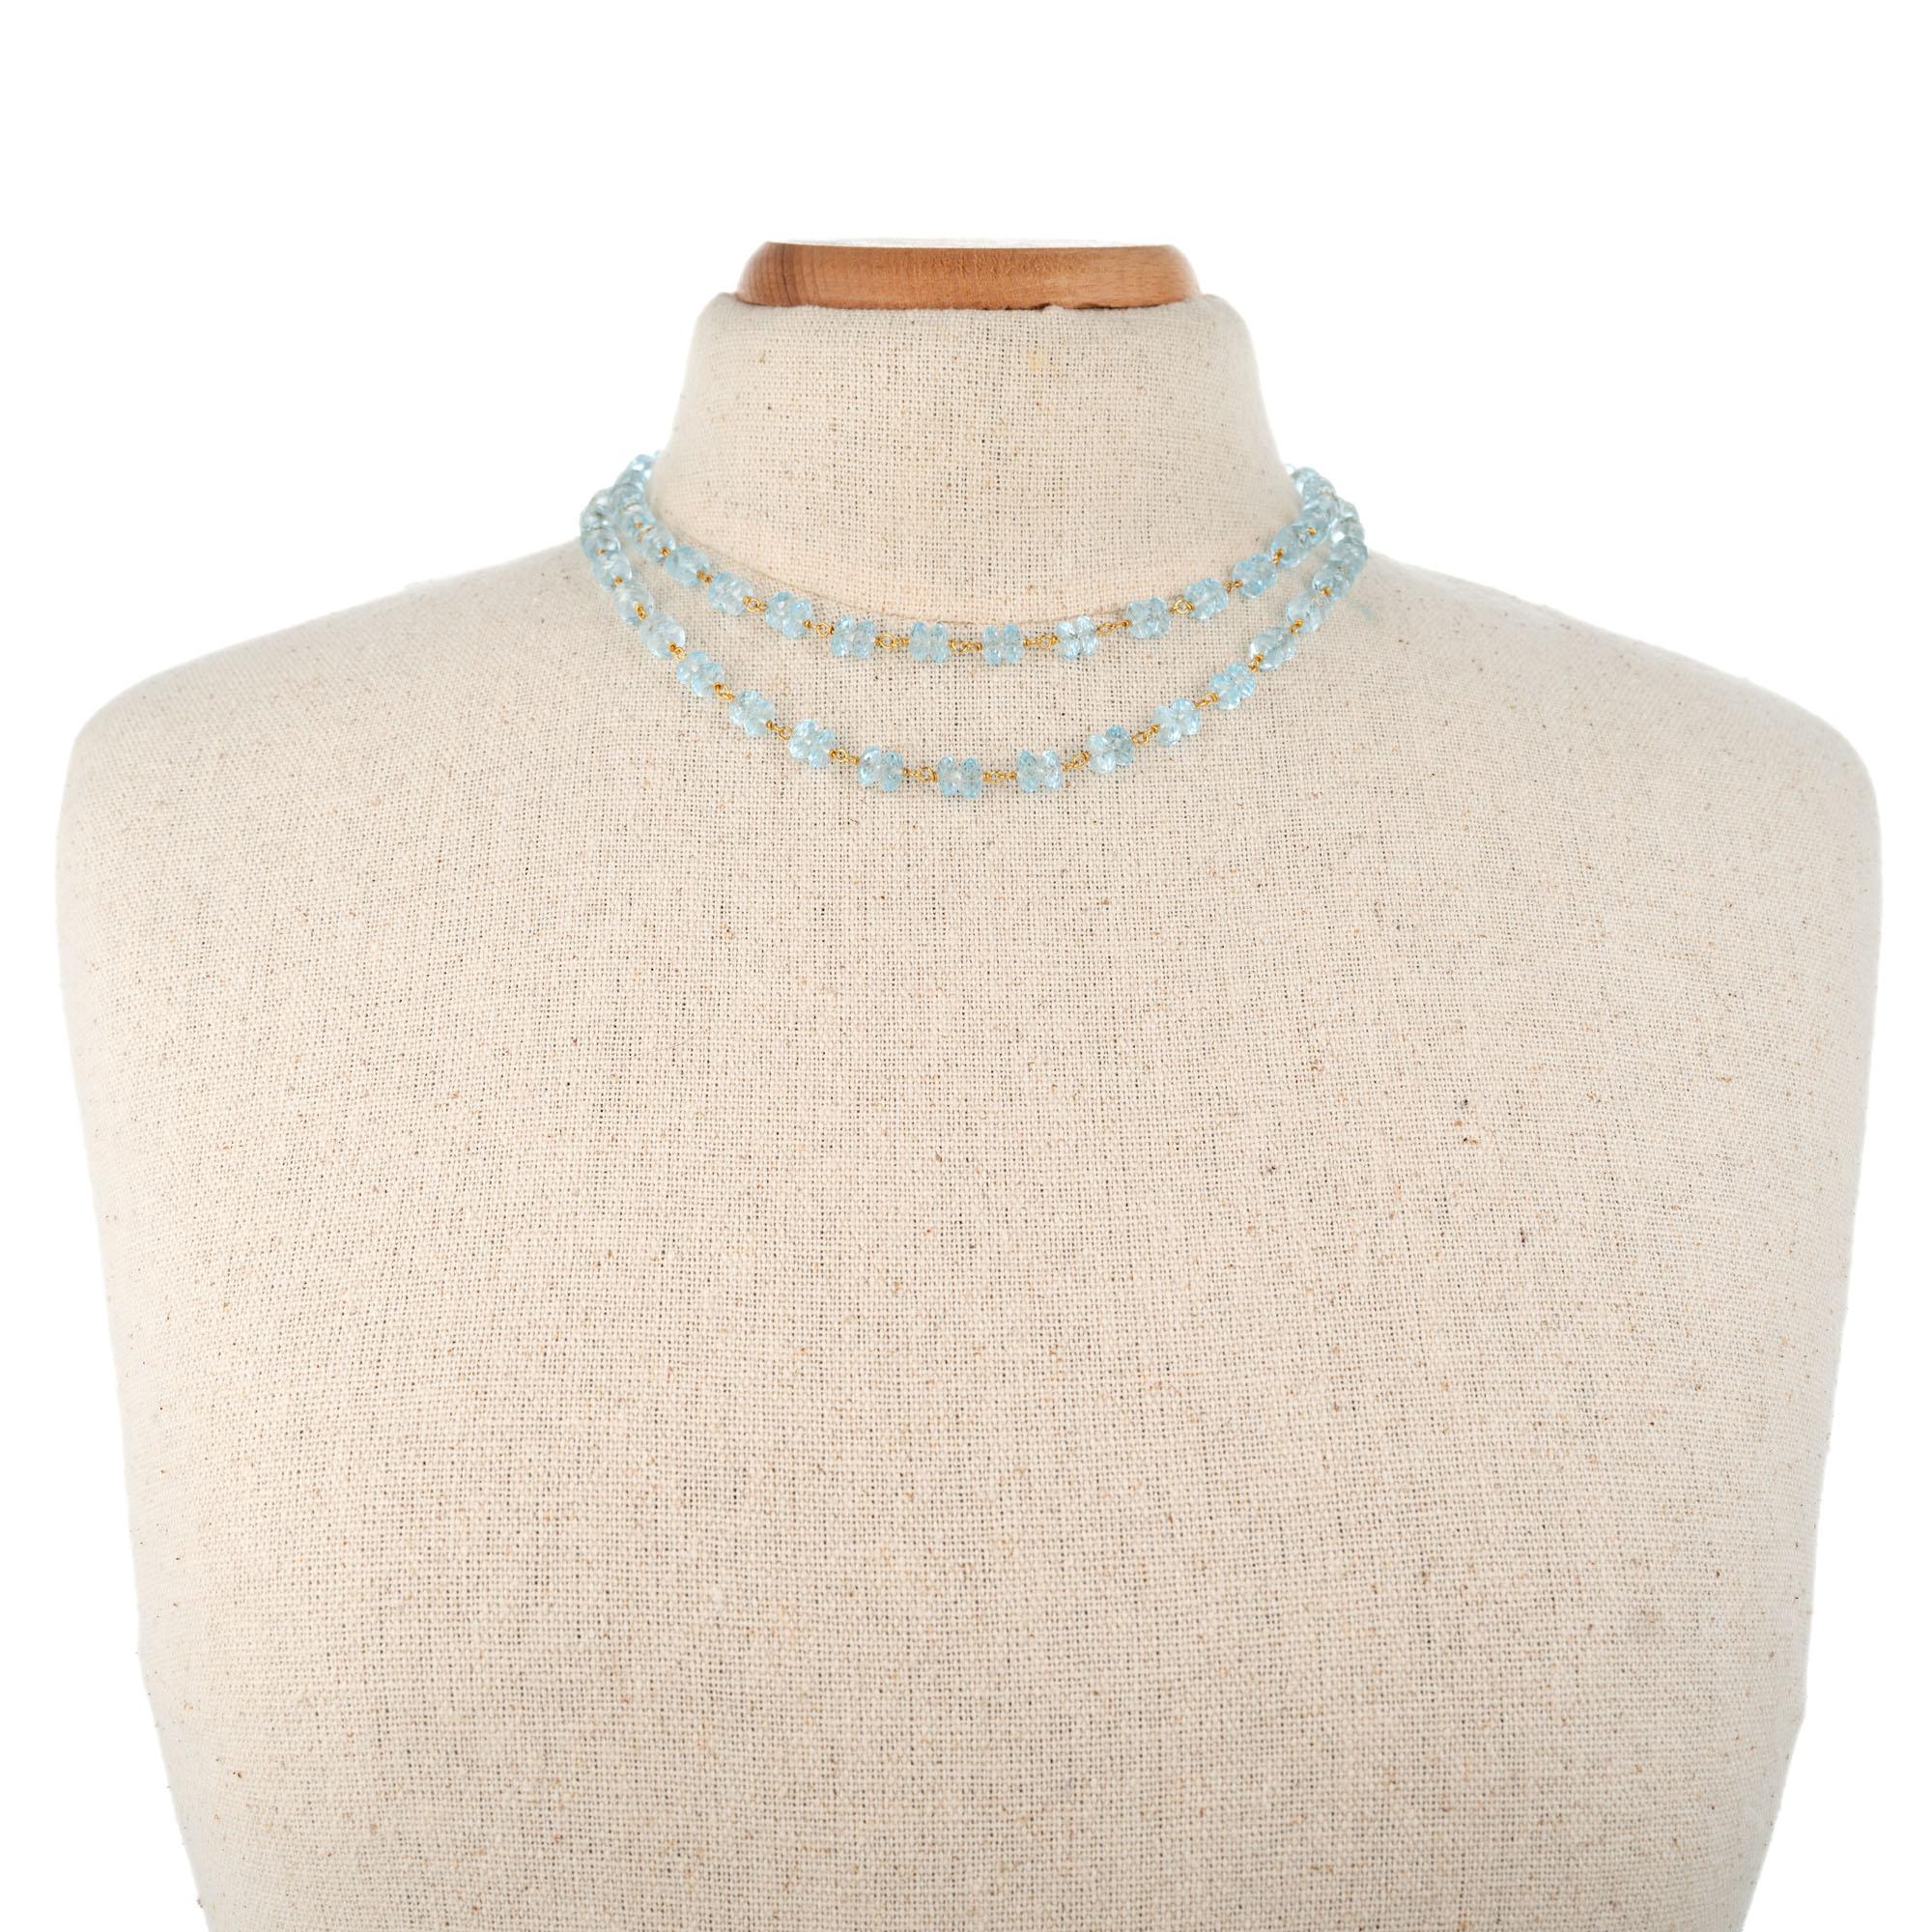 70.00 Carat Carat Blue Topaz Faceted Rondelle Brioletts Bead Gold Necklace In Excellent Condition For Sale In Stamford, CT